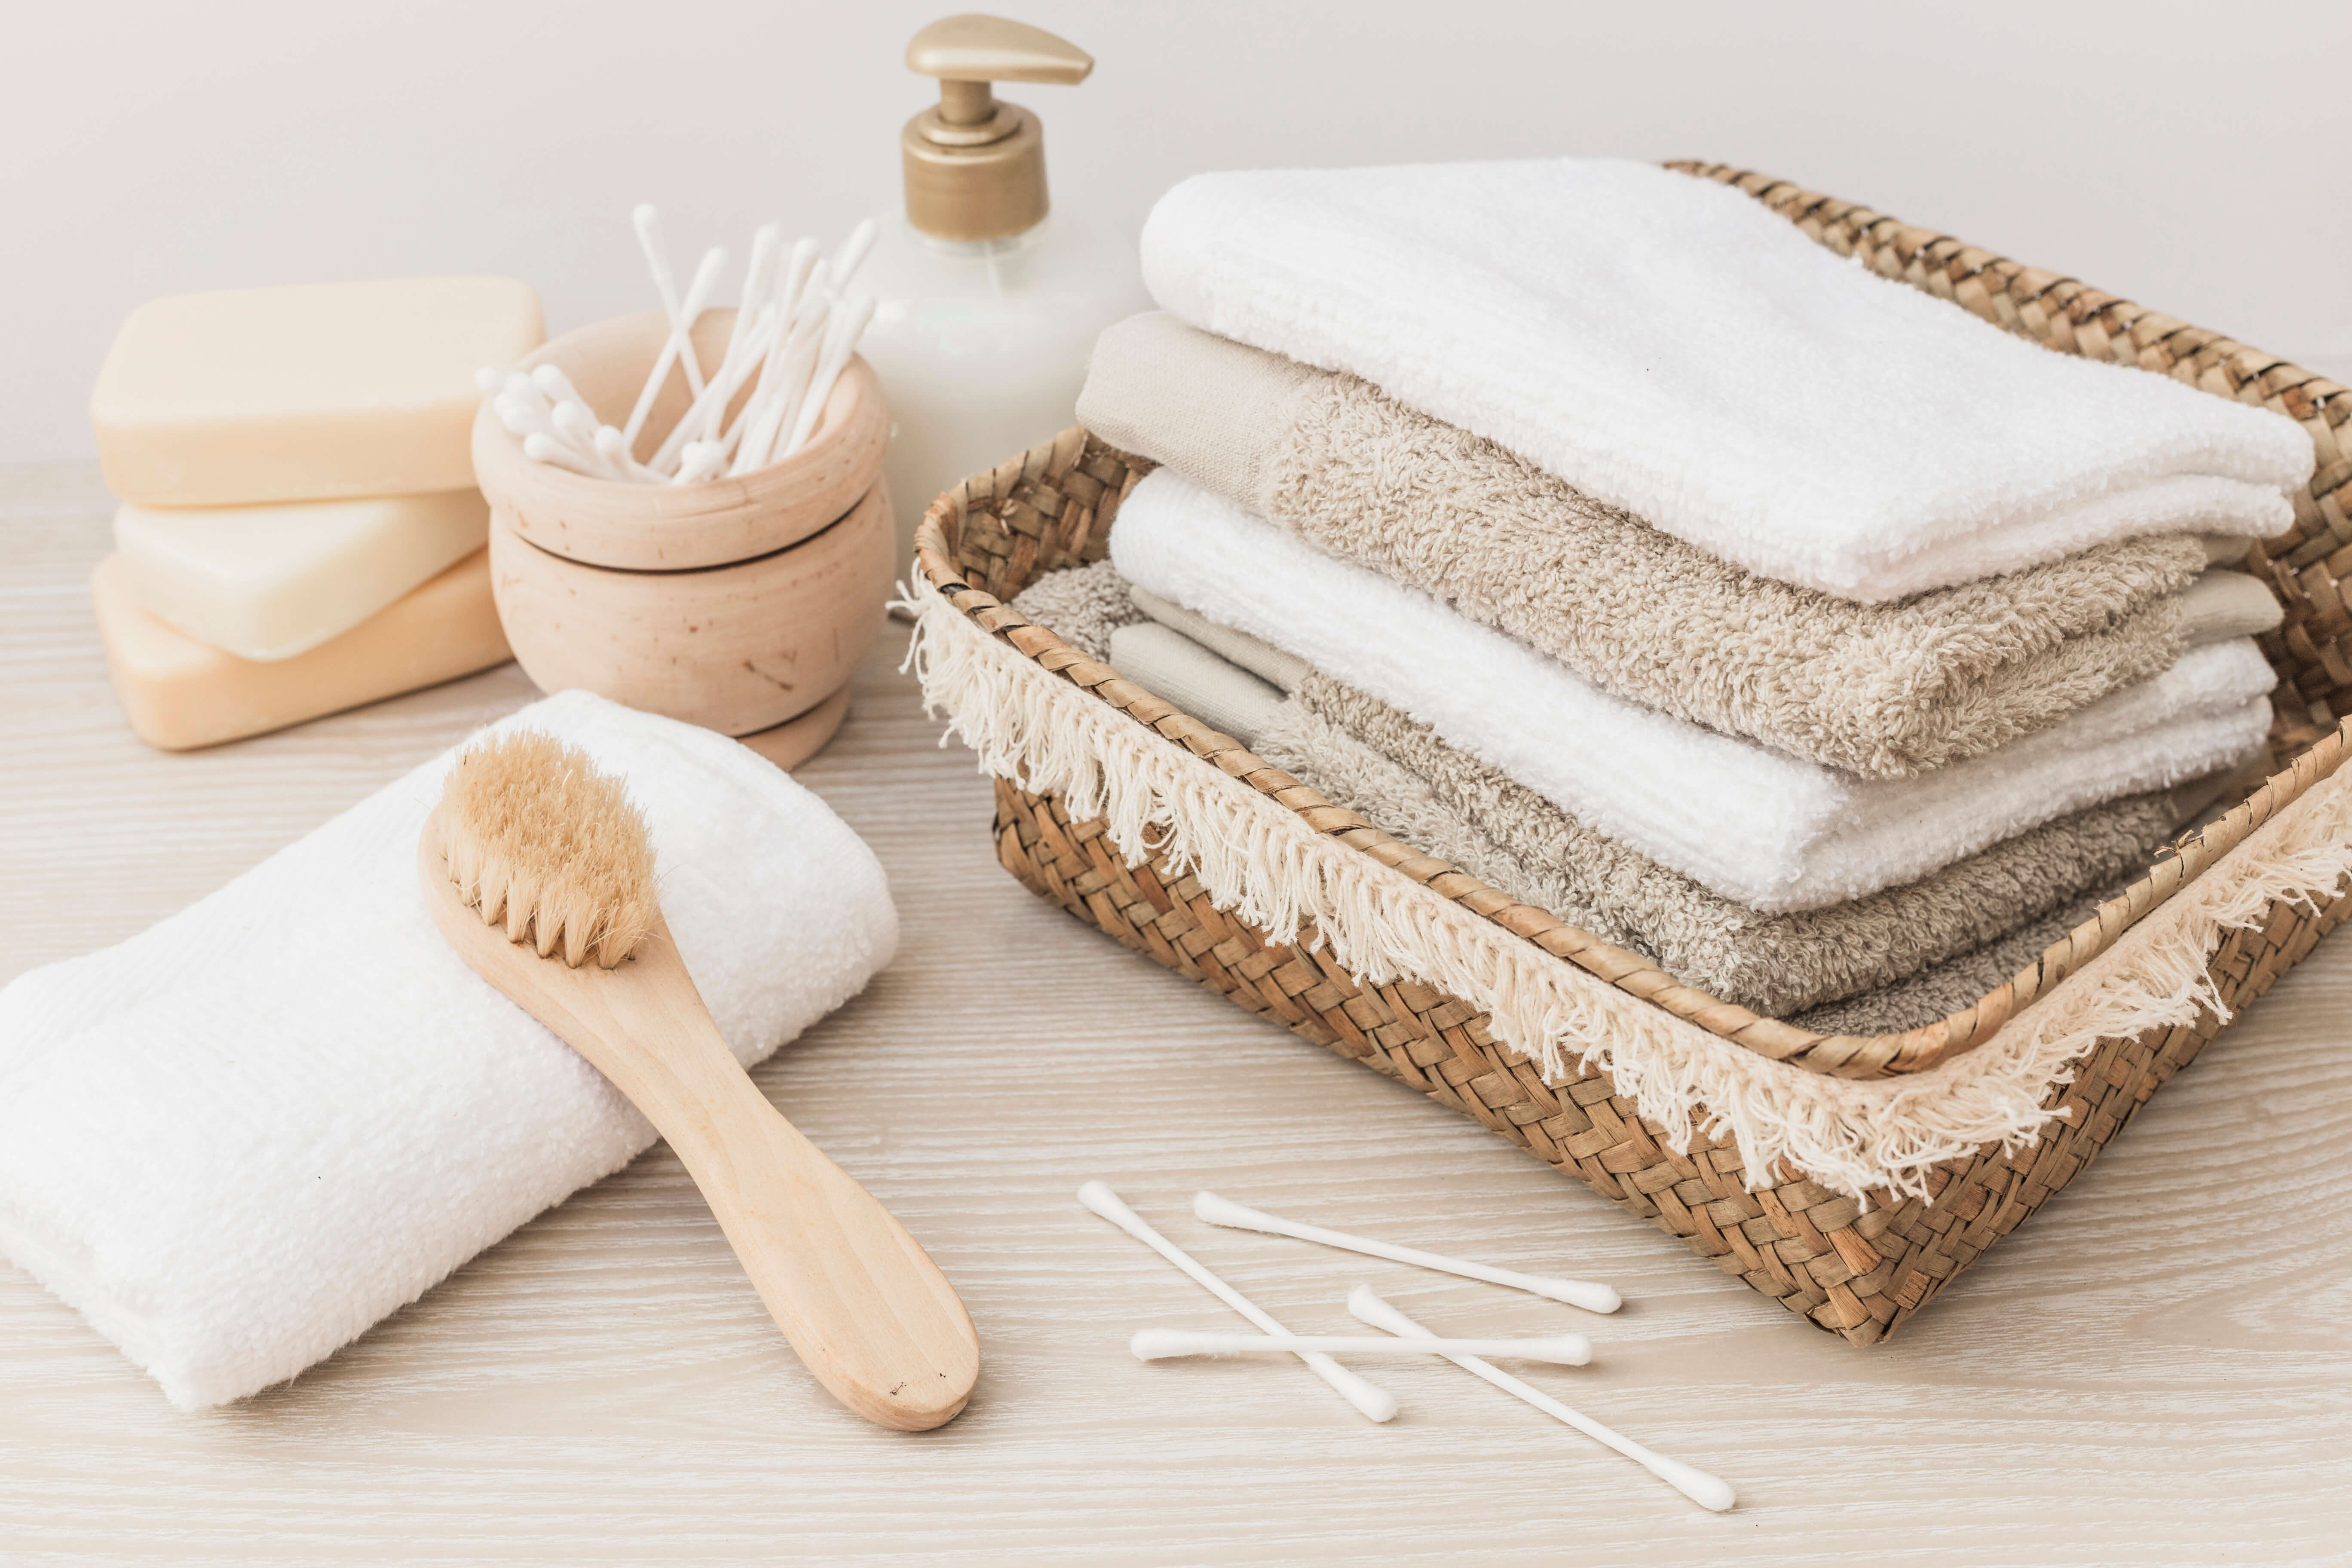 http://kcnmoon.com/cdn/shop/articles/stacked-towels-brush-soap-cotton-swab-cosmetic-bottle-wooden-background.jpg?v=1652381969